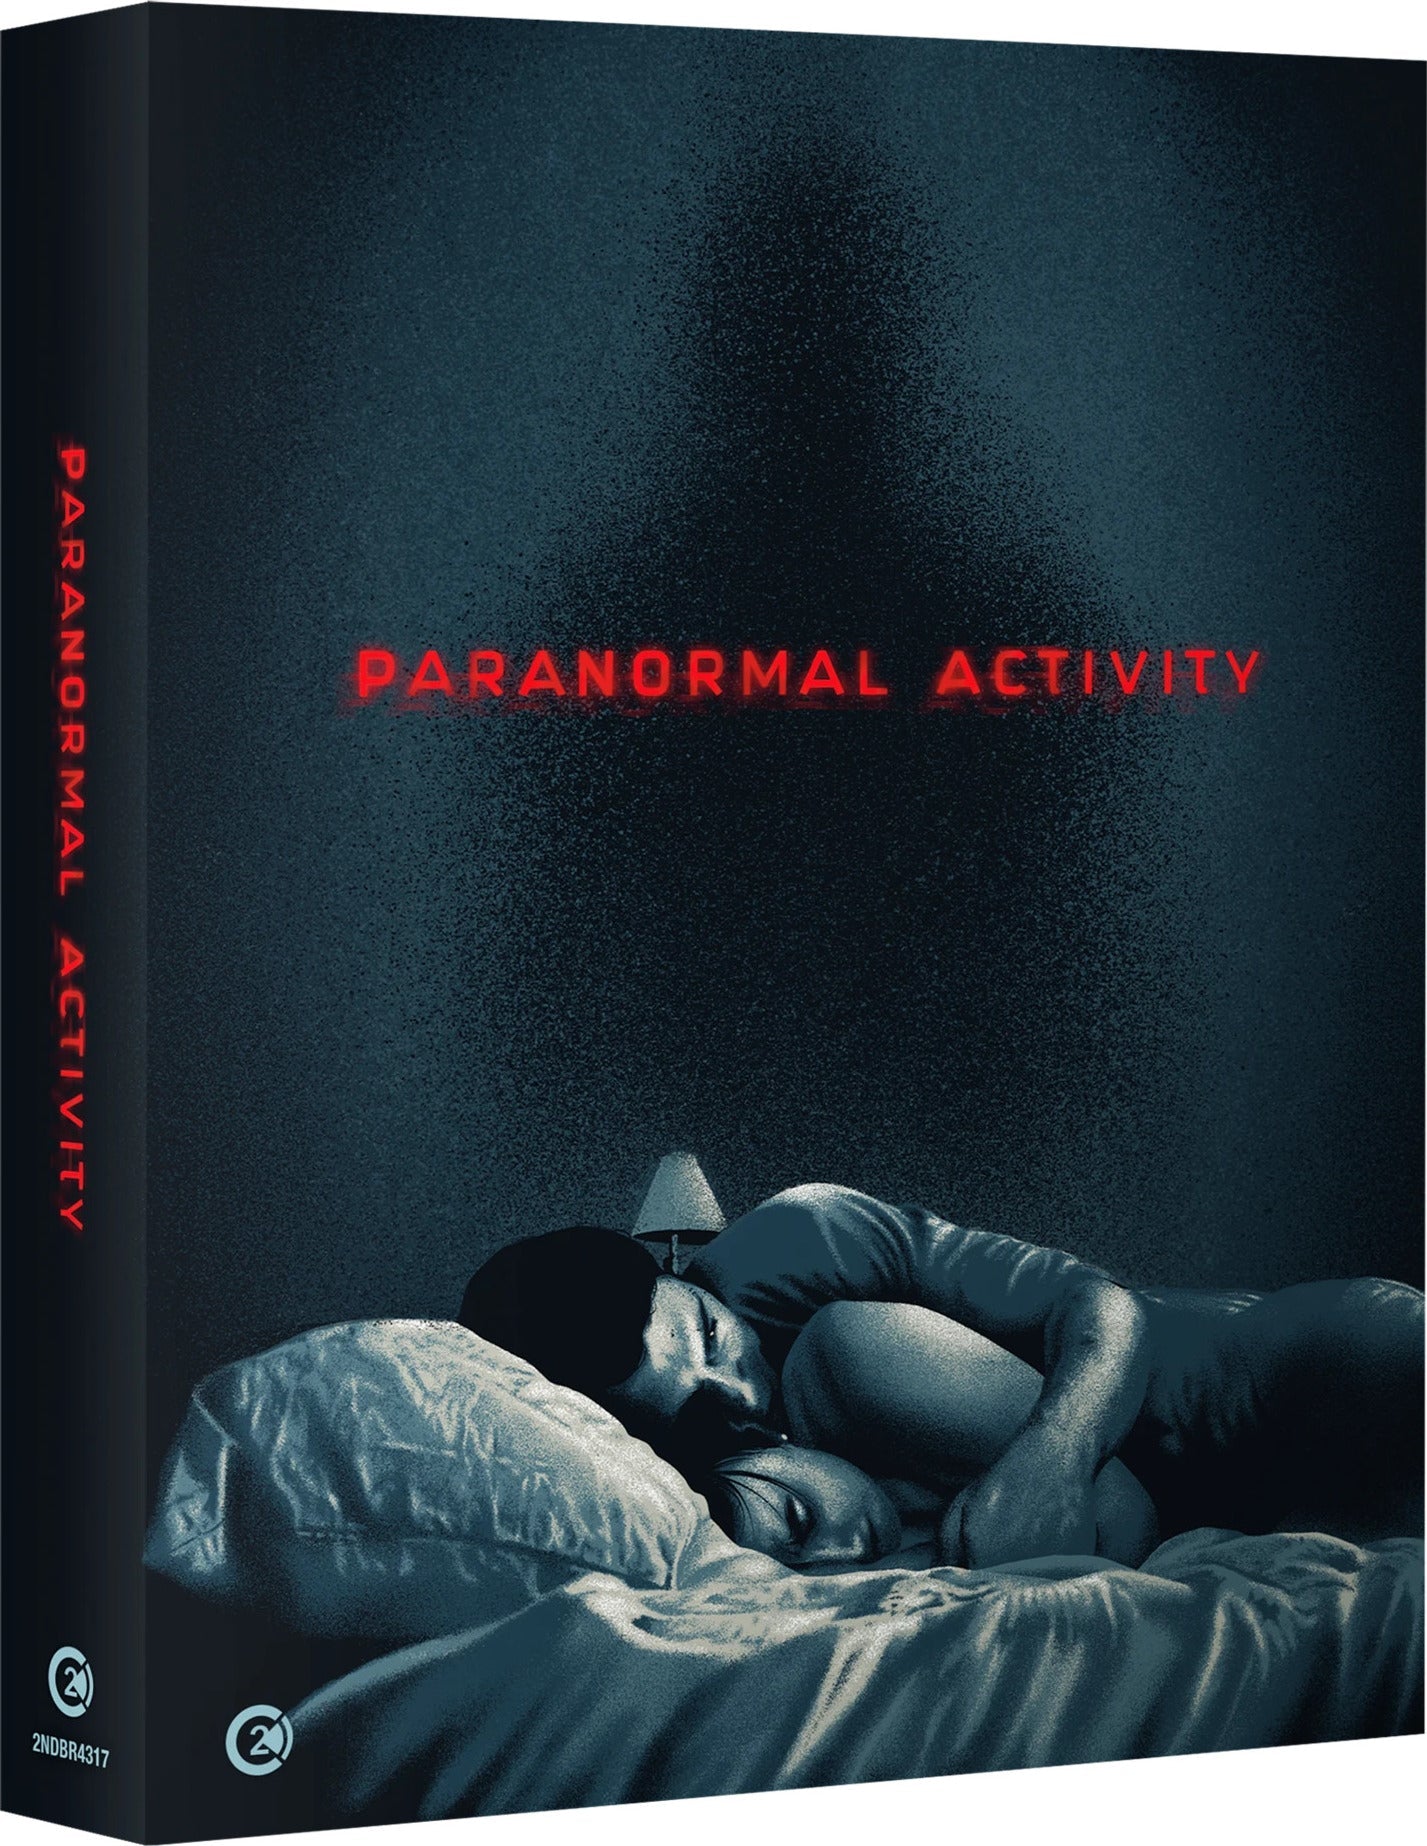 Paranormal Activity (Limited Edition - Region B Import) Blu-Ray Blu-Ray